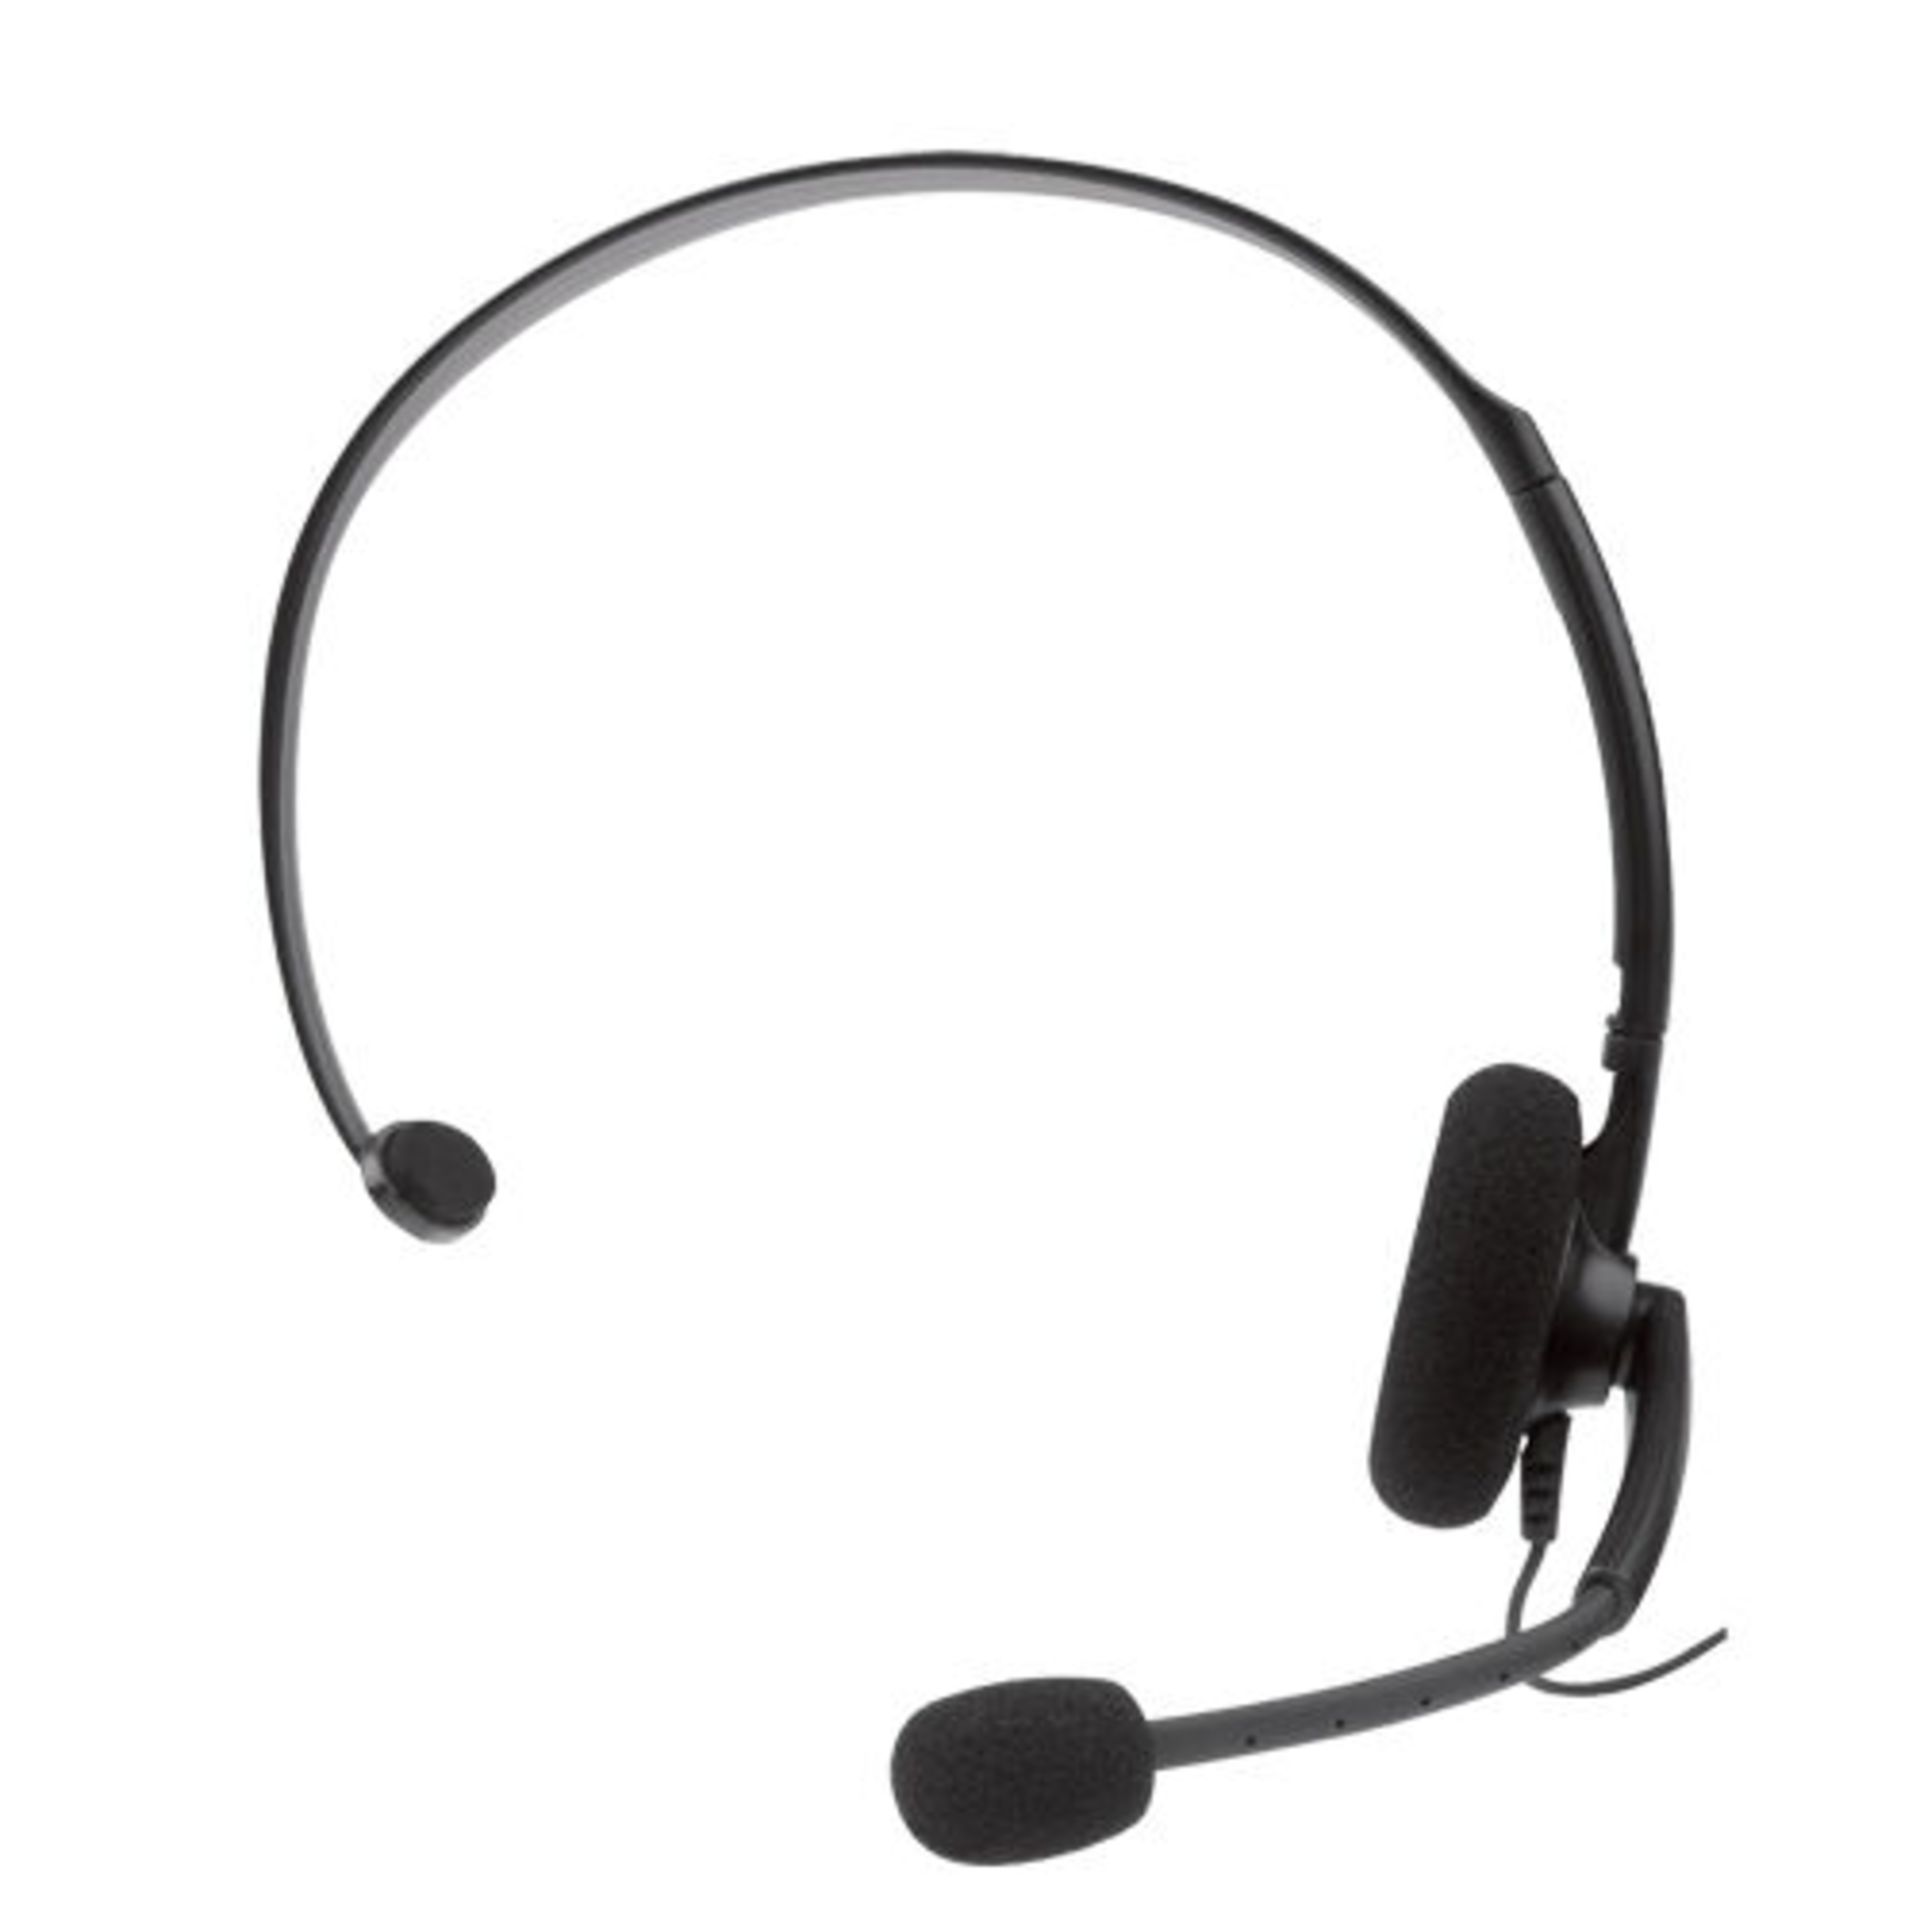 JOBLOT 100 X NEW OFFICIAL XBOX 360 LIVE ONLINE CHAT HEADSET WITH MIC GAMING HEADPHONES 2.5MM AUX - Image 4 of 6